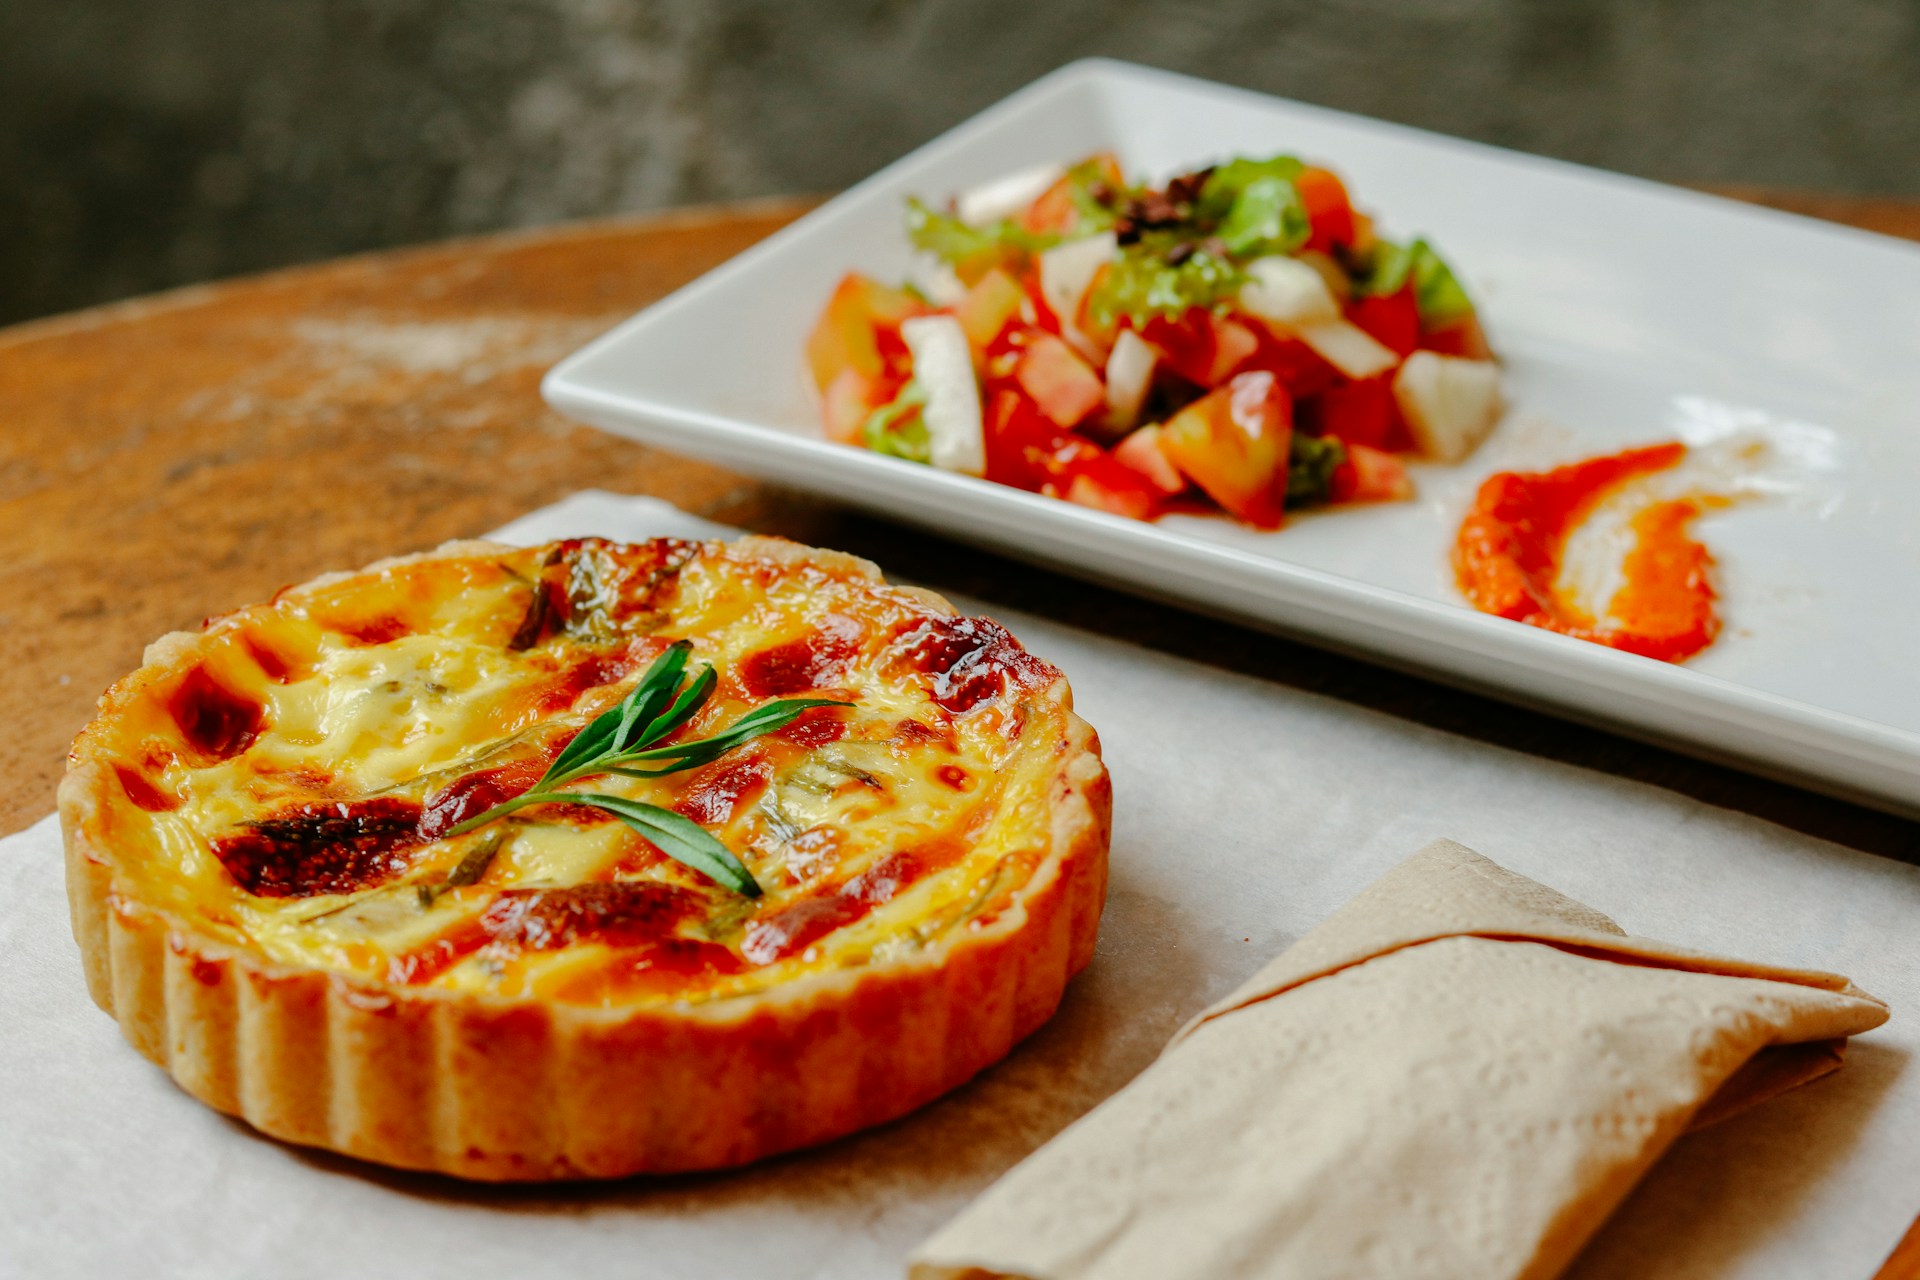 A quiche on a plate